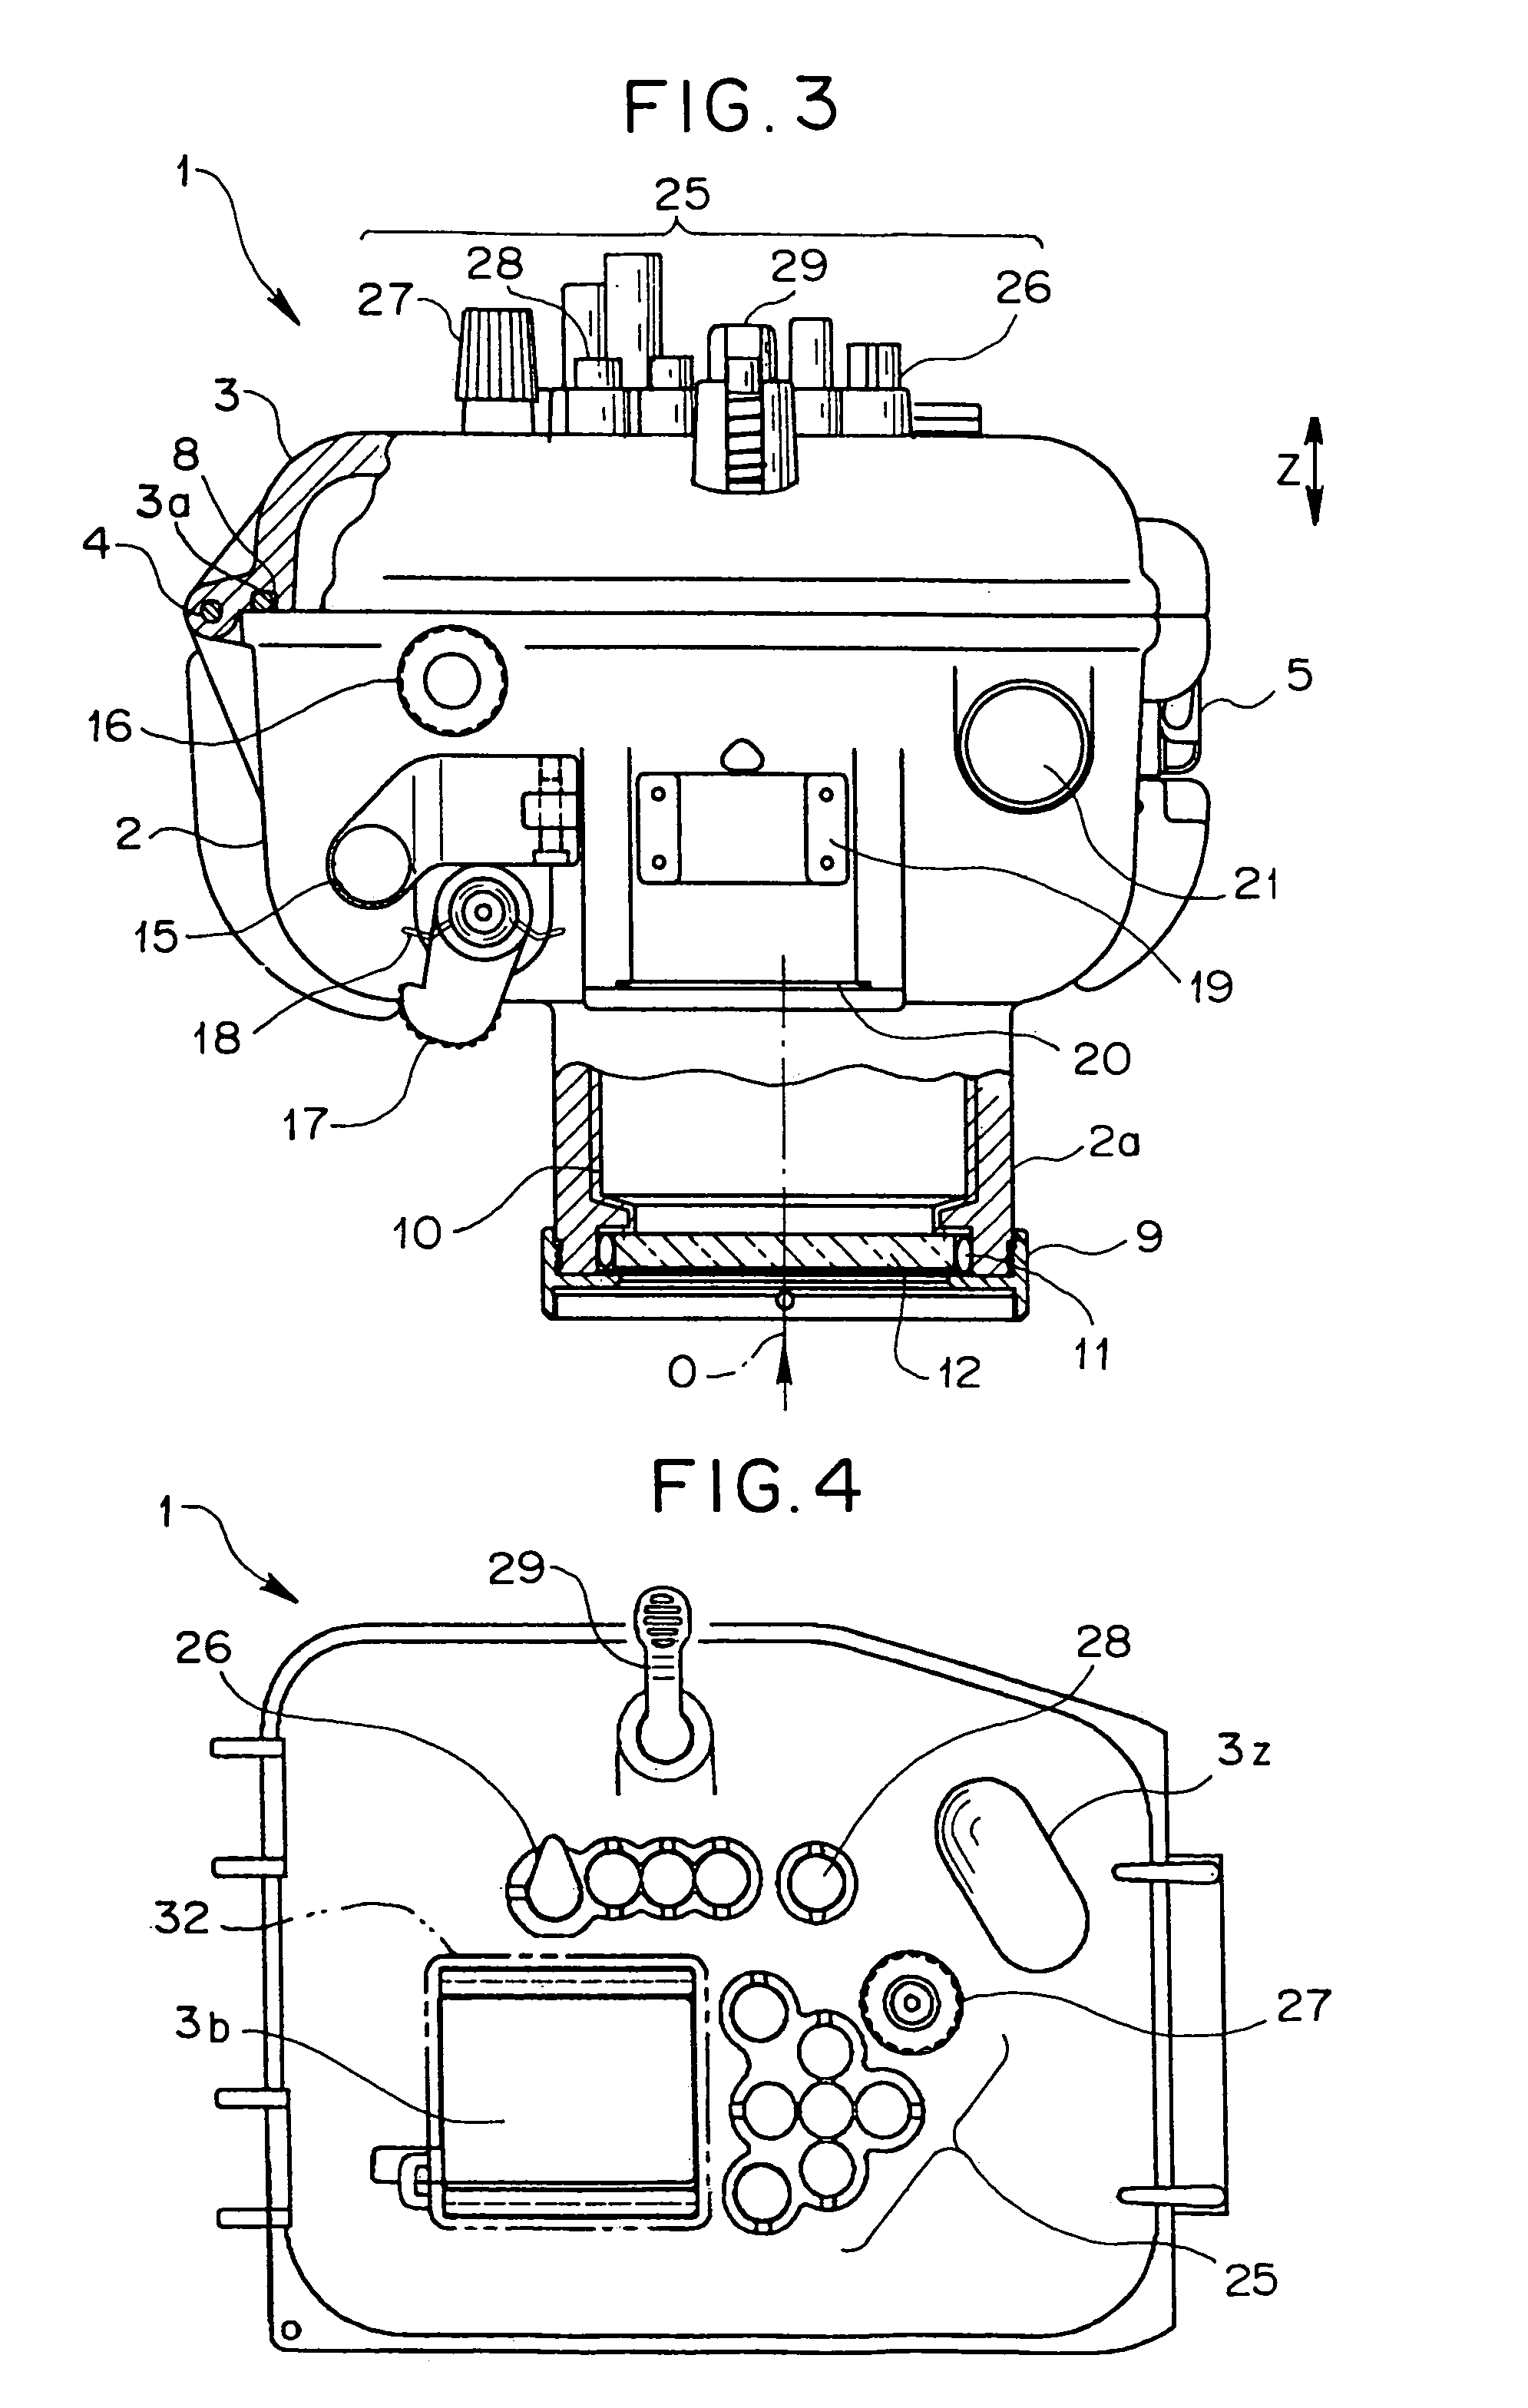 System comprising camera and waterproof housing